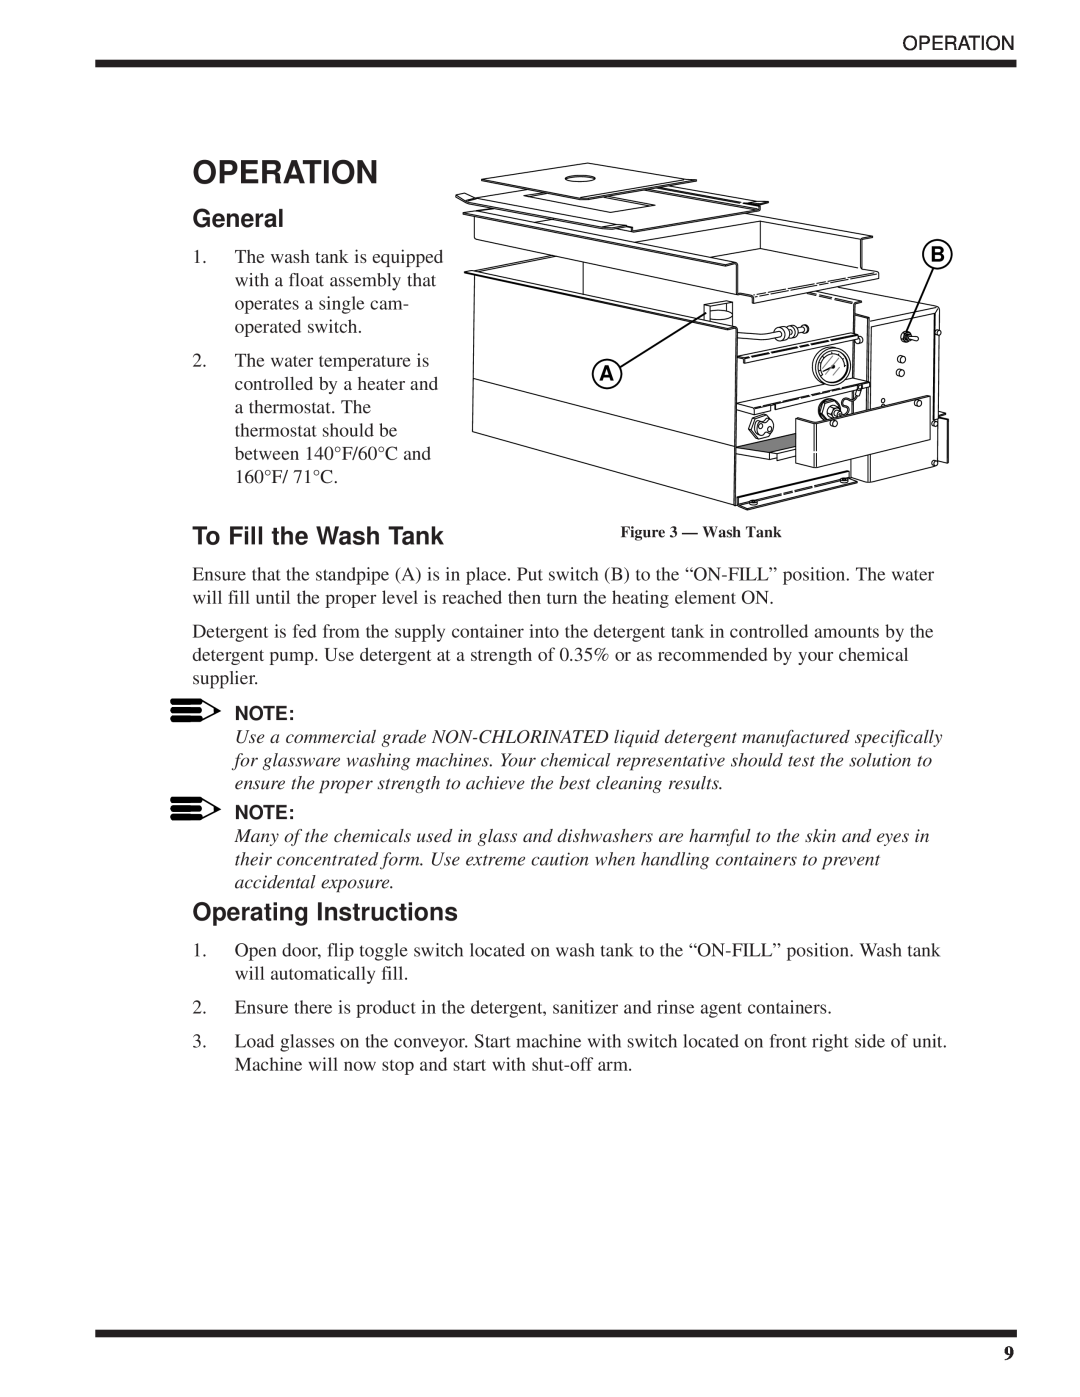 Moyer Diebel DF2-M6, DF-M6, DF1-M6 technical manual Operation, General, To Fill the Wash Tank, Operating Instructions 